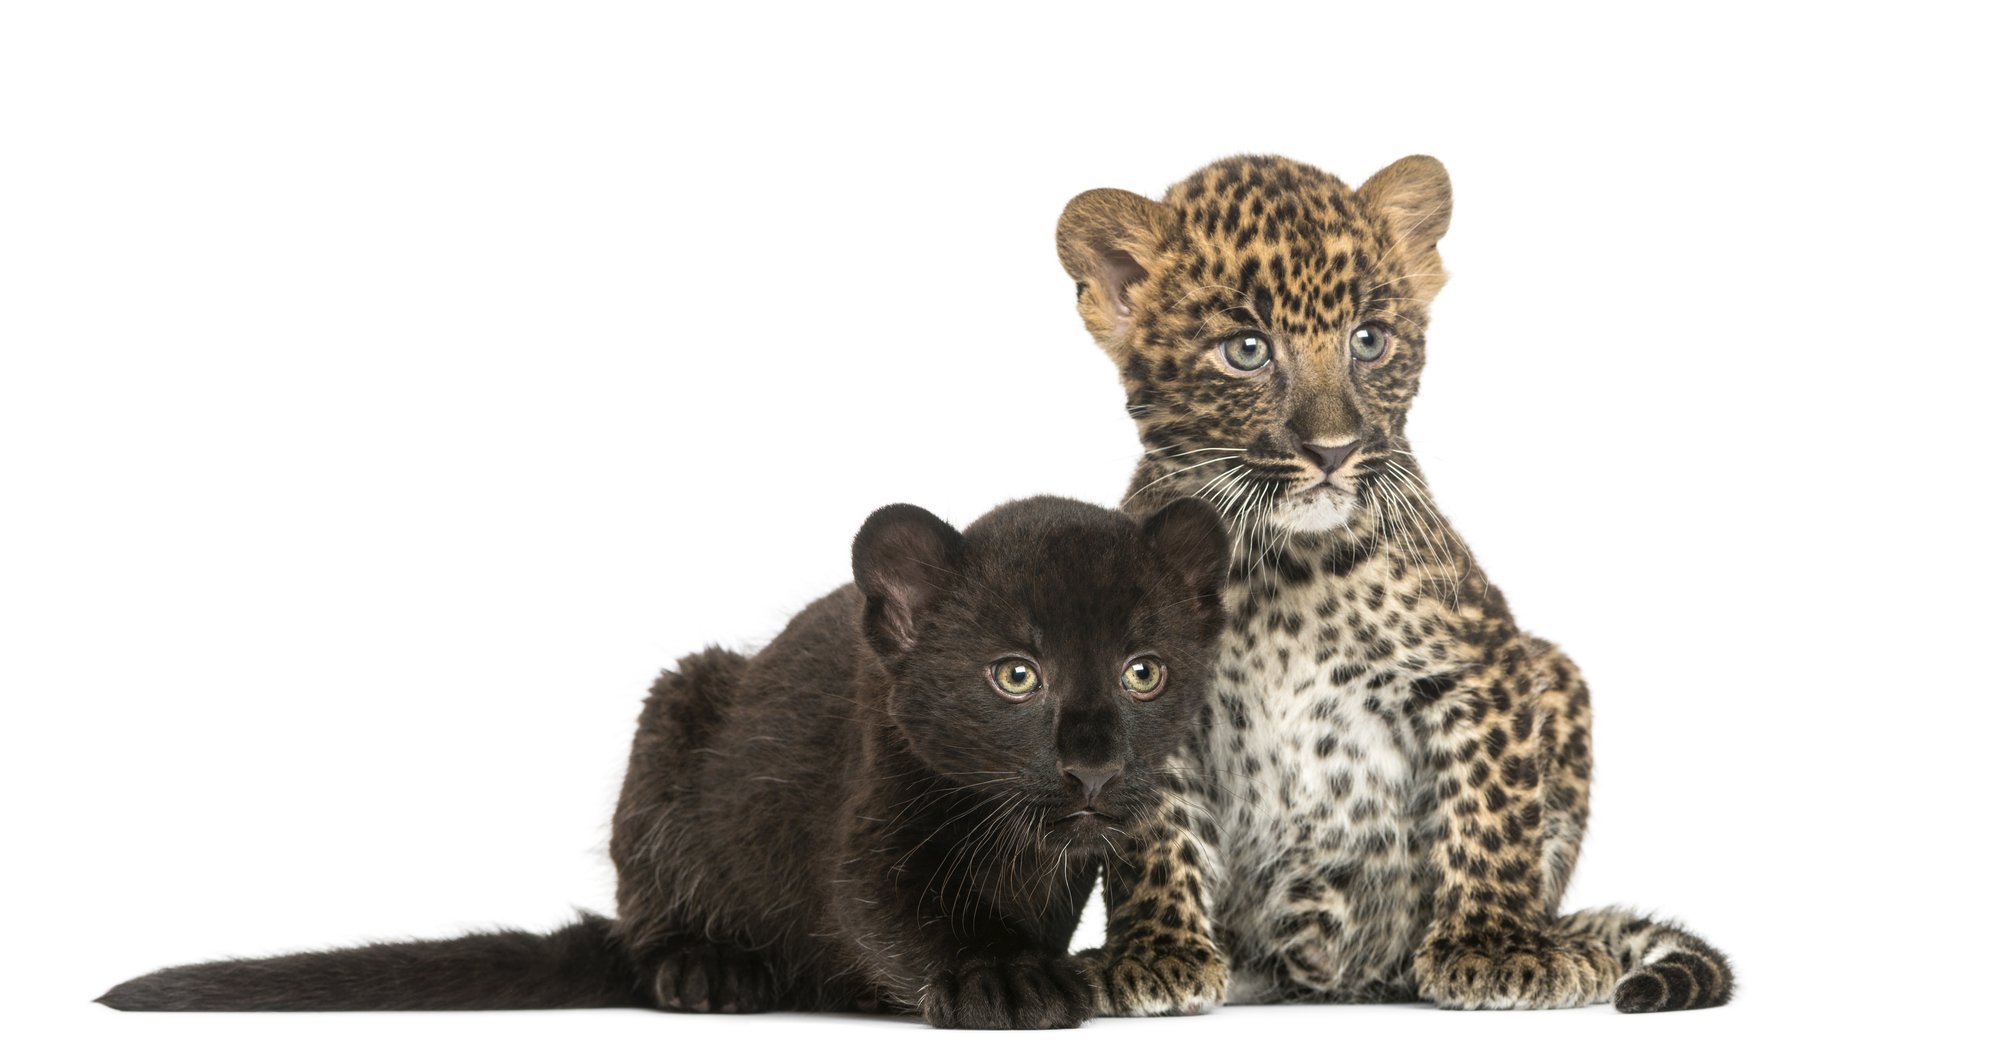 baby leopards "black panther" and common